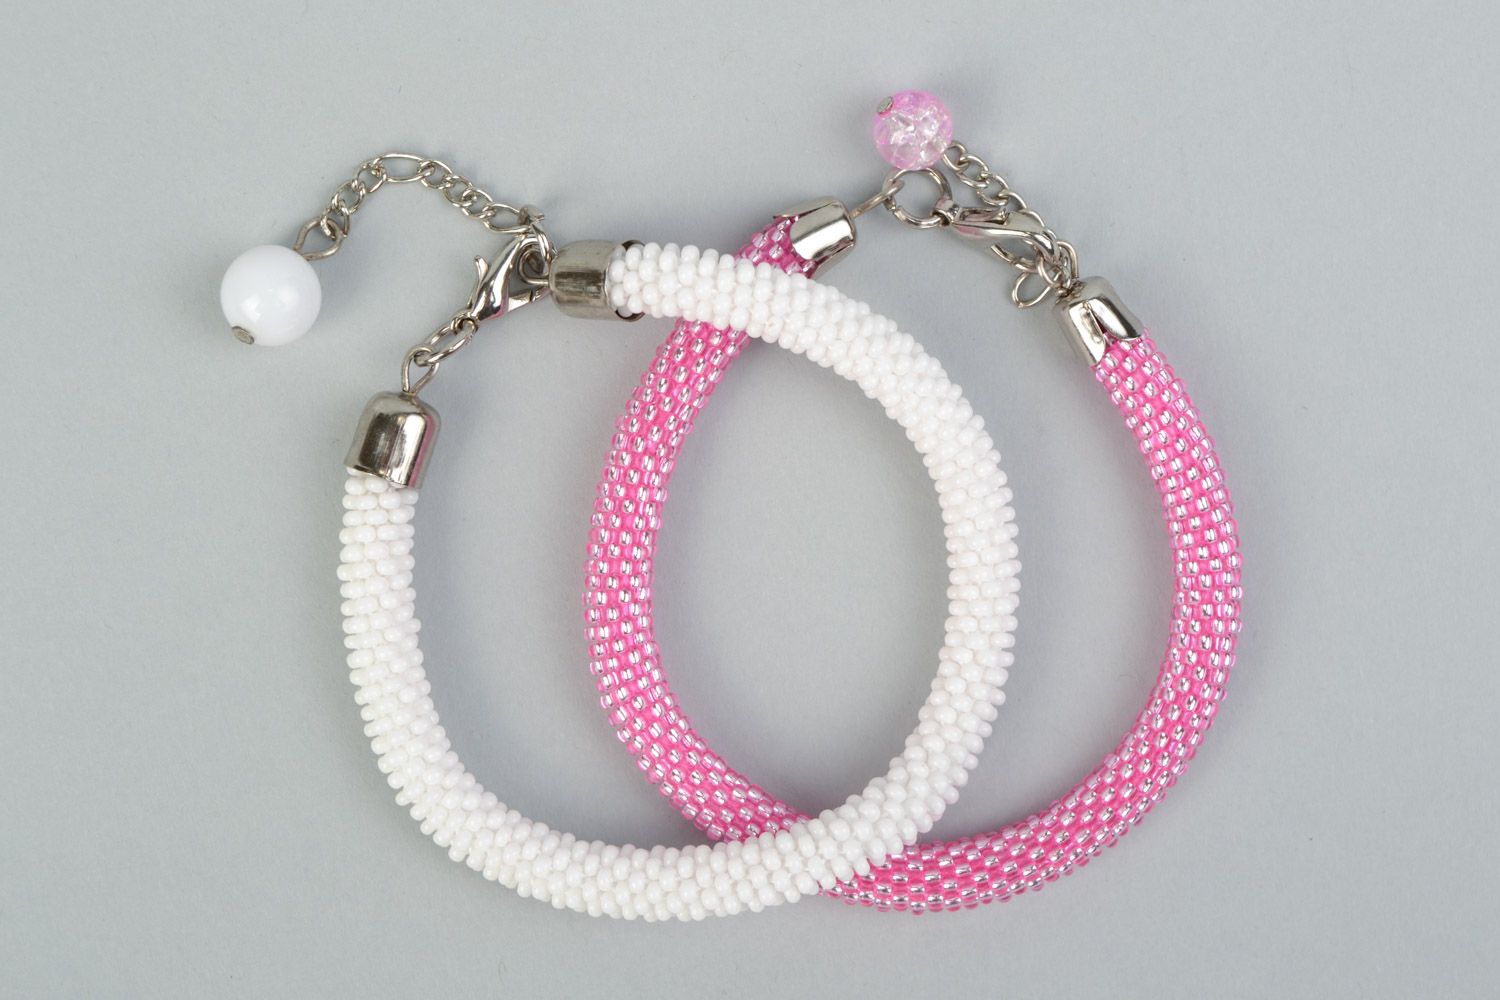 Set of 2 handmade beaded cord women's wrist bracelets in pink and white colors photo 2